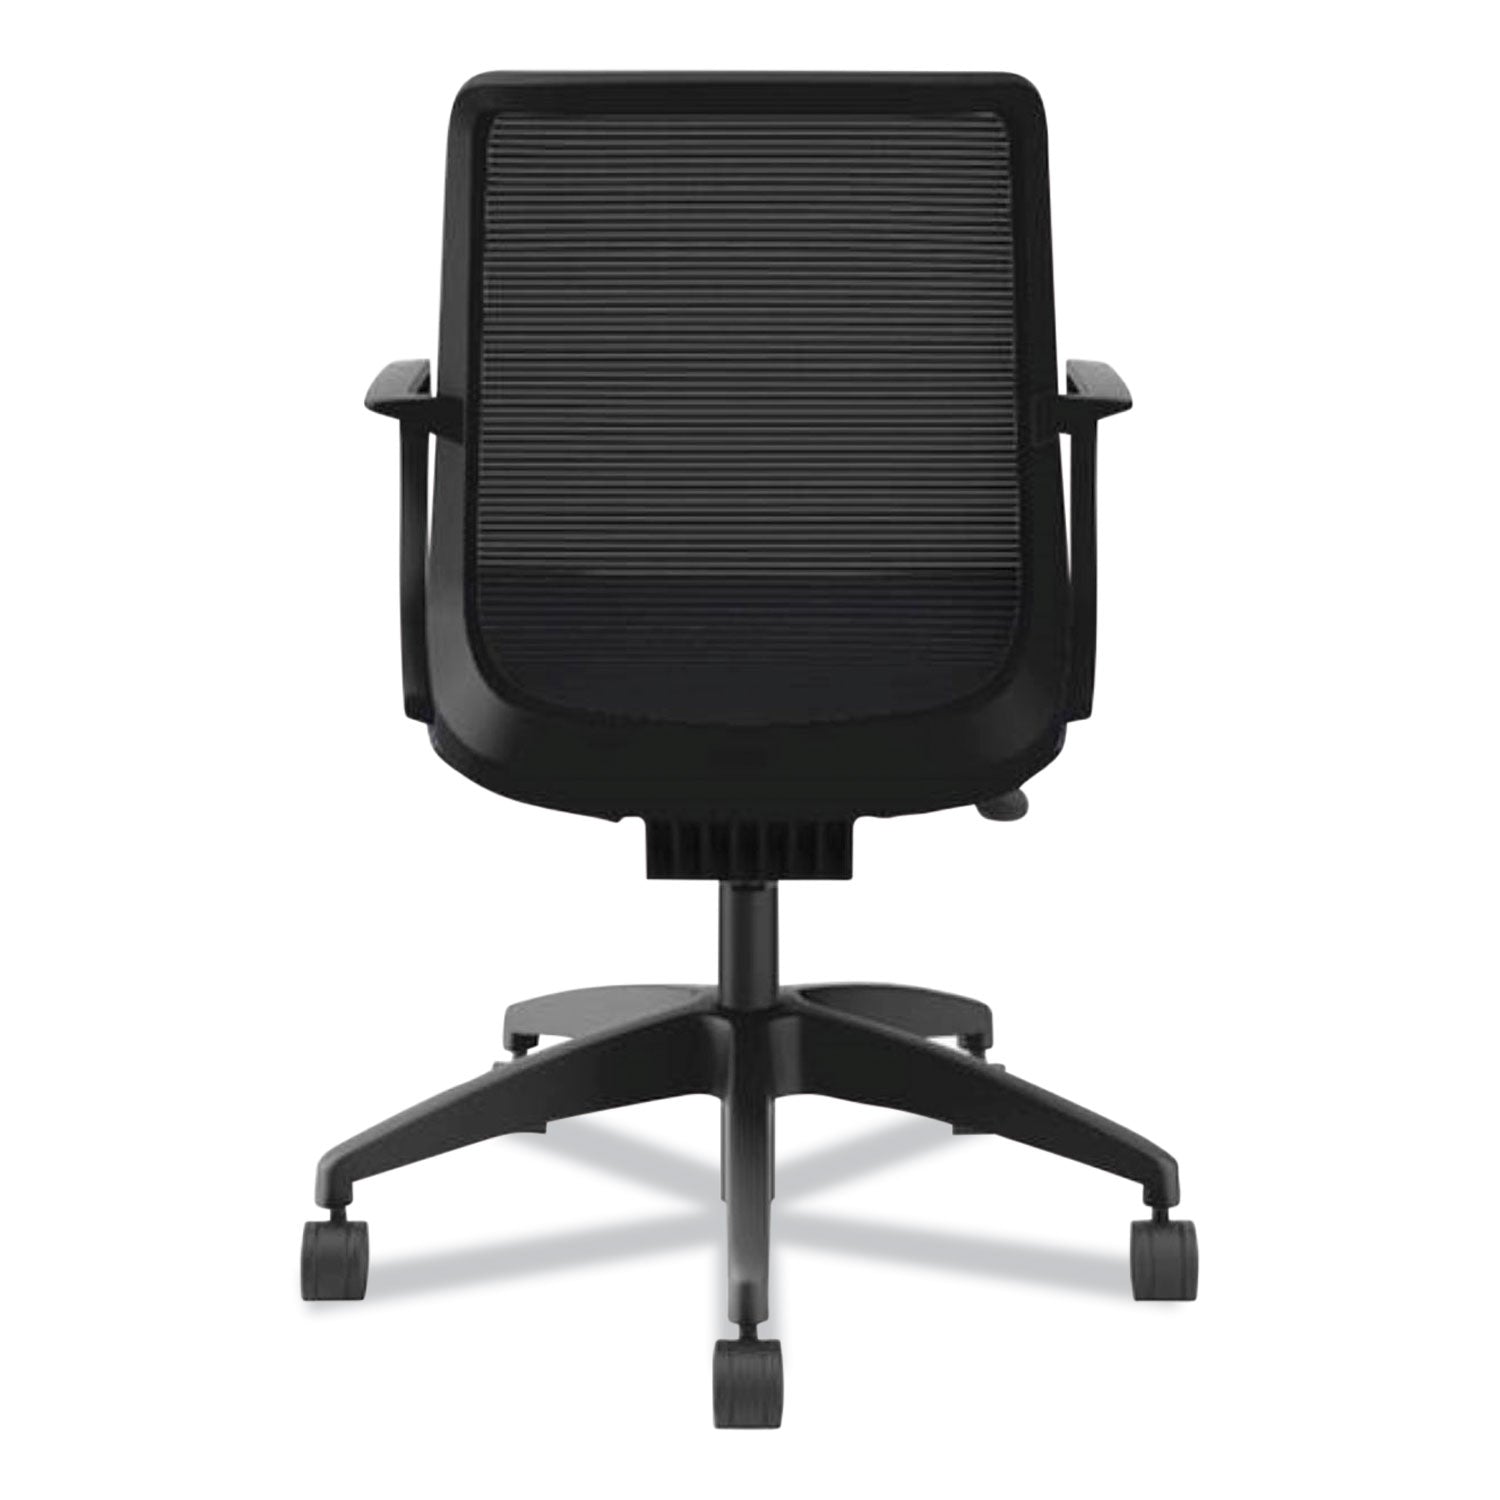 cliq-office-chair-supports-up-to-300-lb-17-to-22-seat-height-navy-seat-black-back-base-ships-in-7-10-business-days_honclqimapx13t - 3